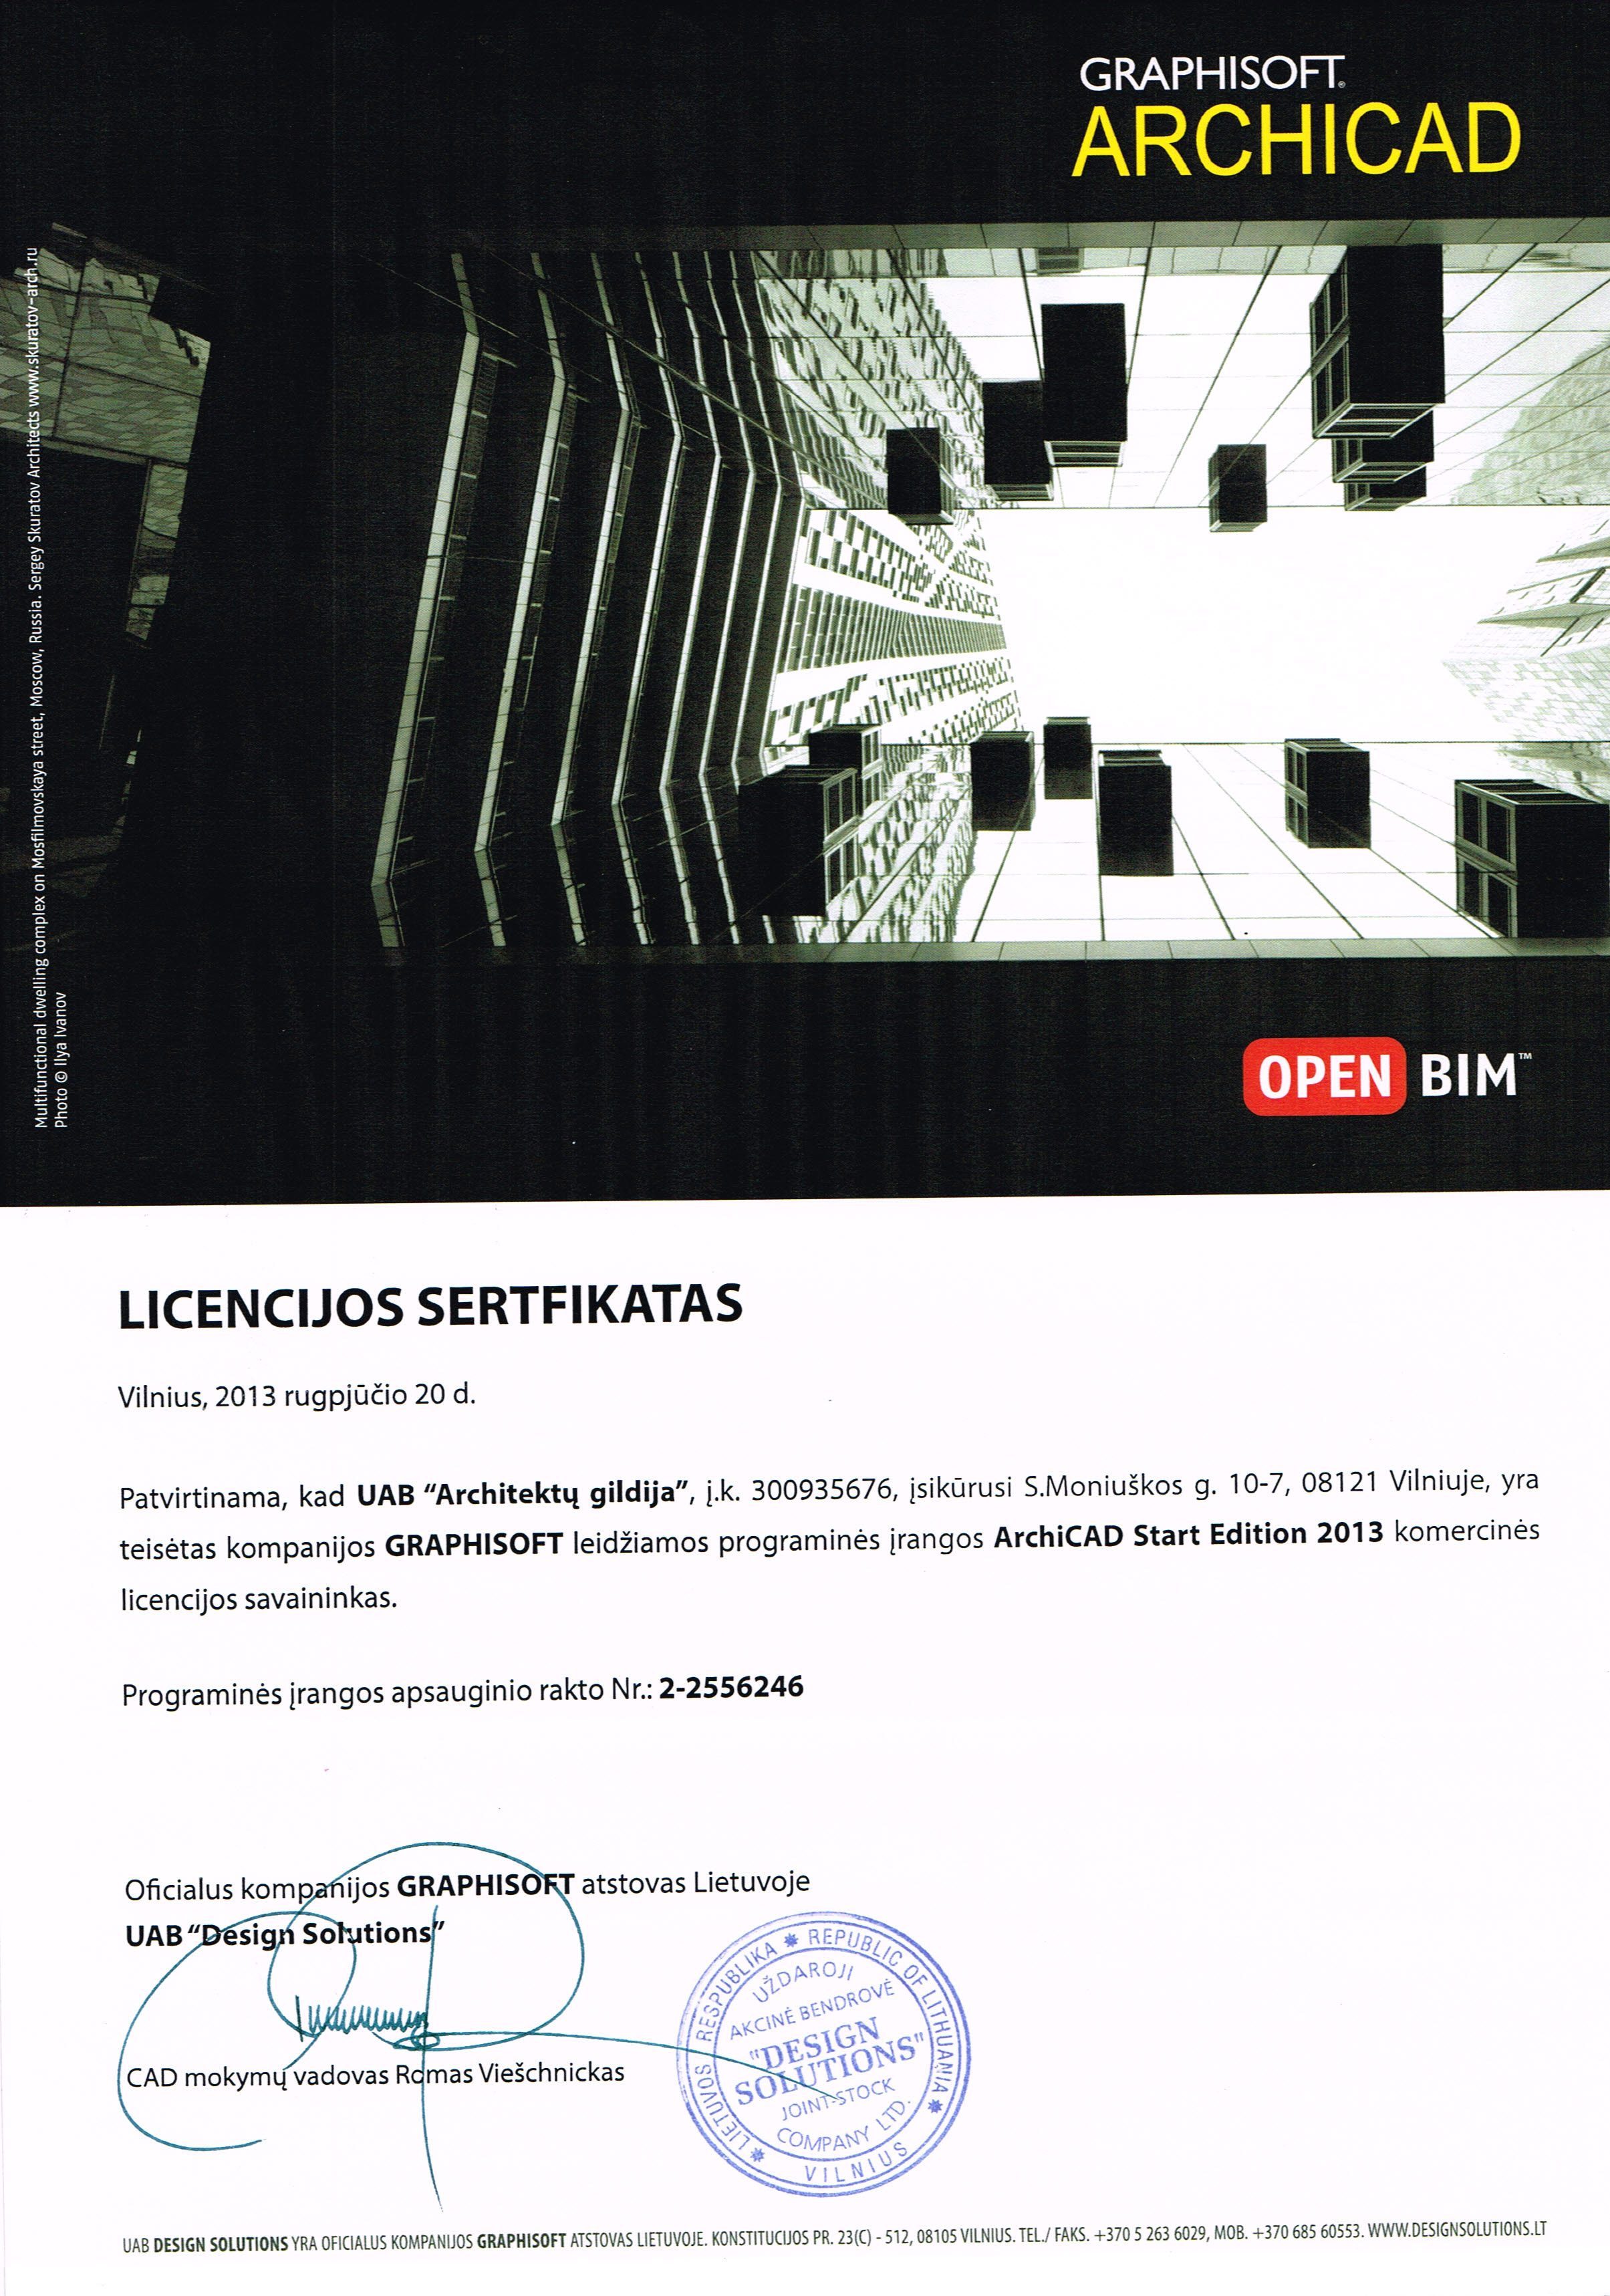 Archicad licenses by ArchicadTeam.com